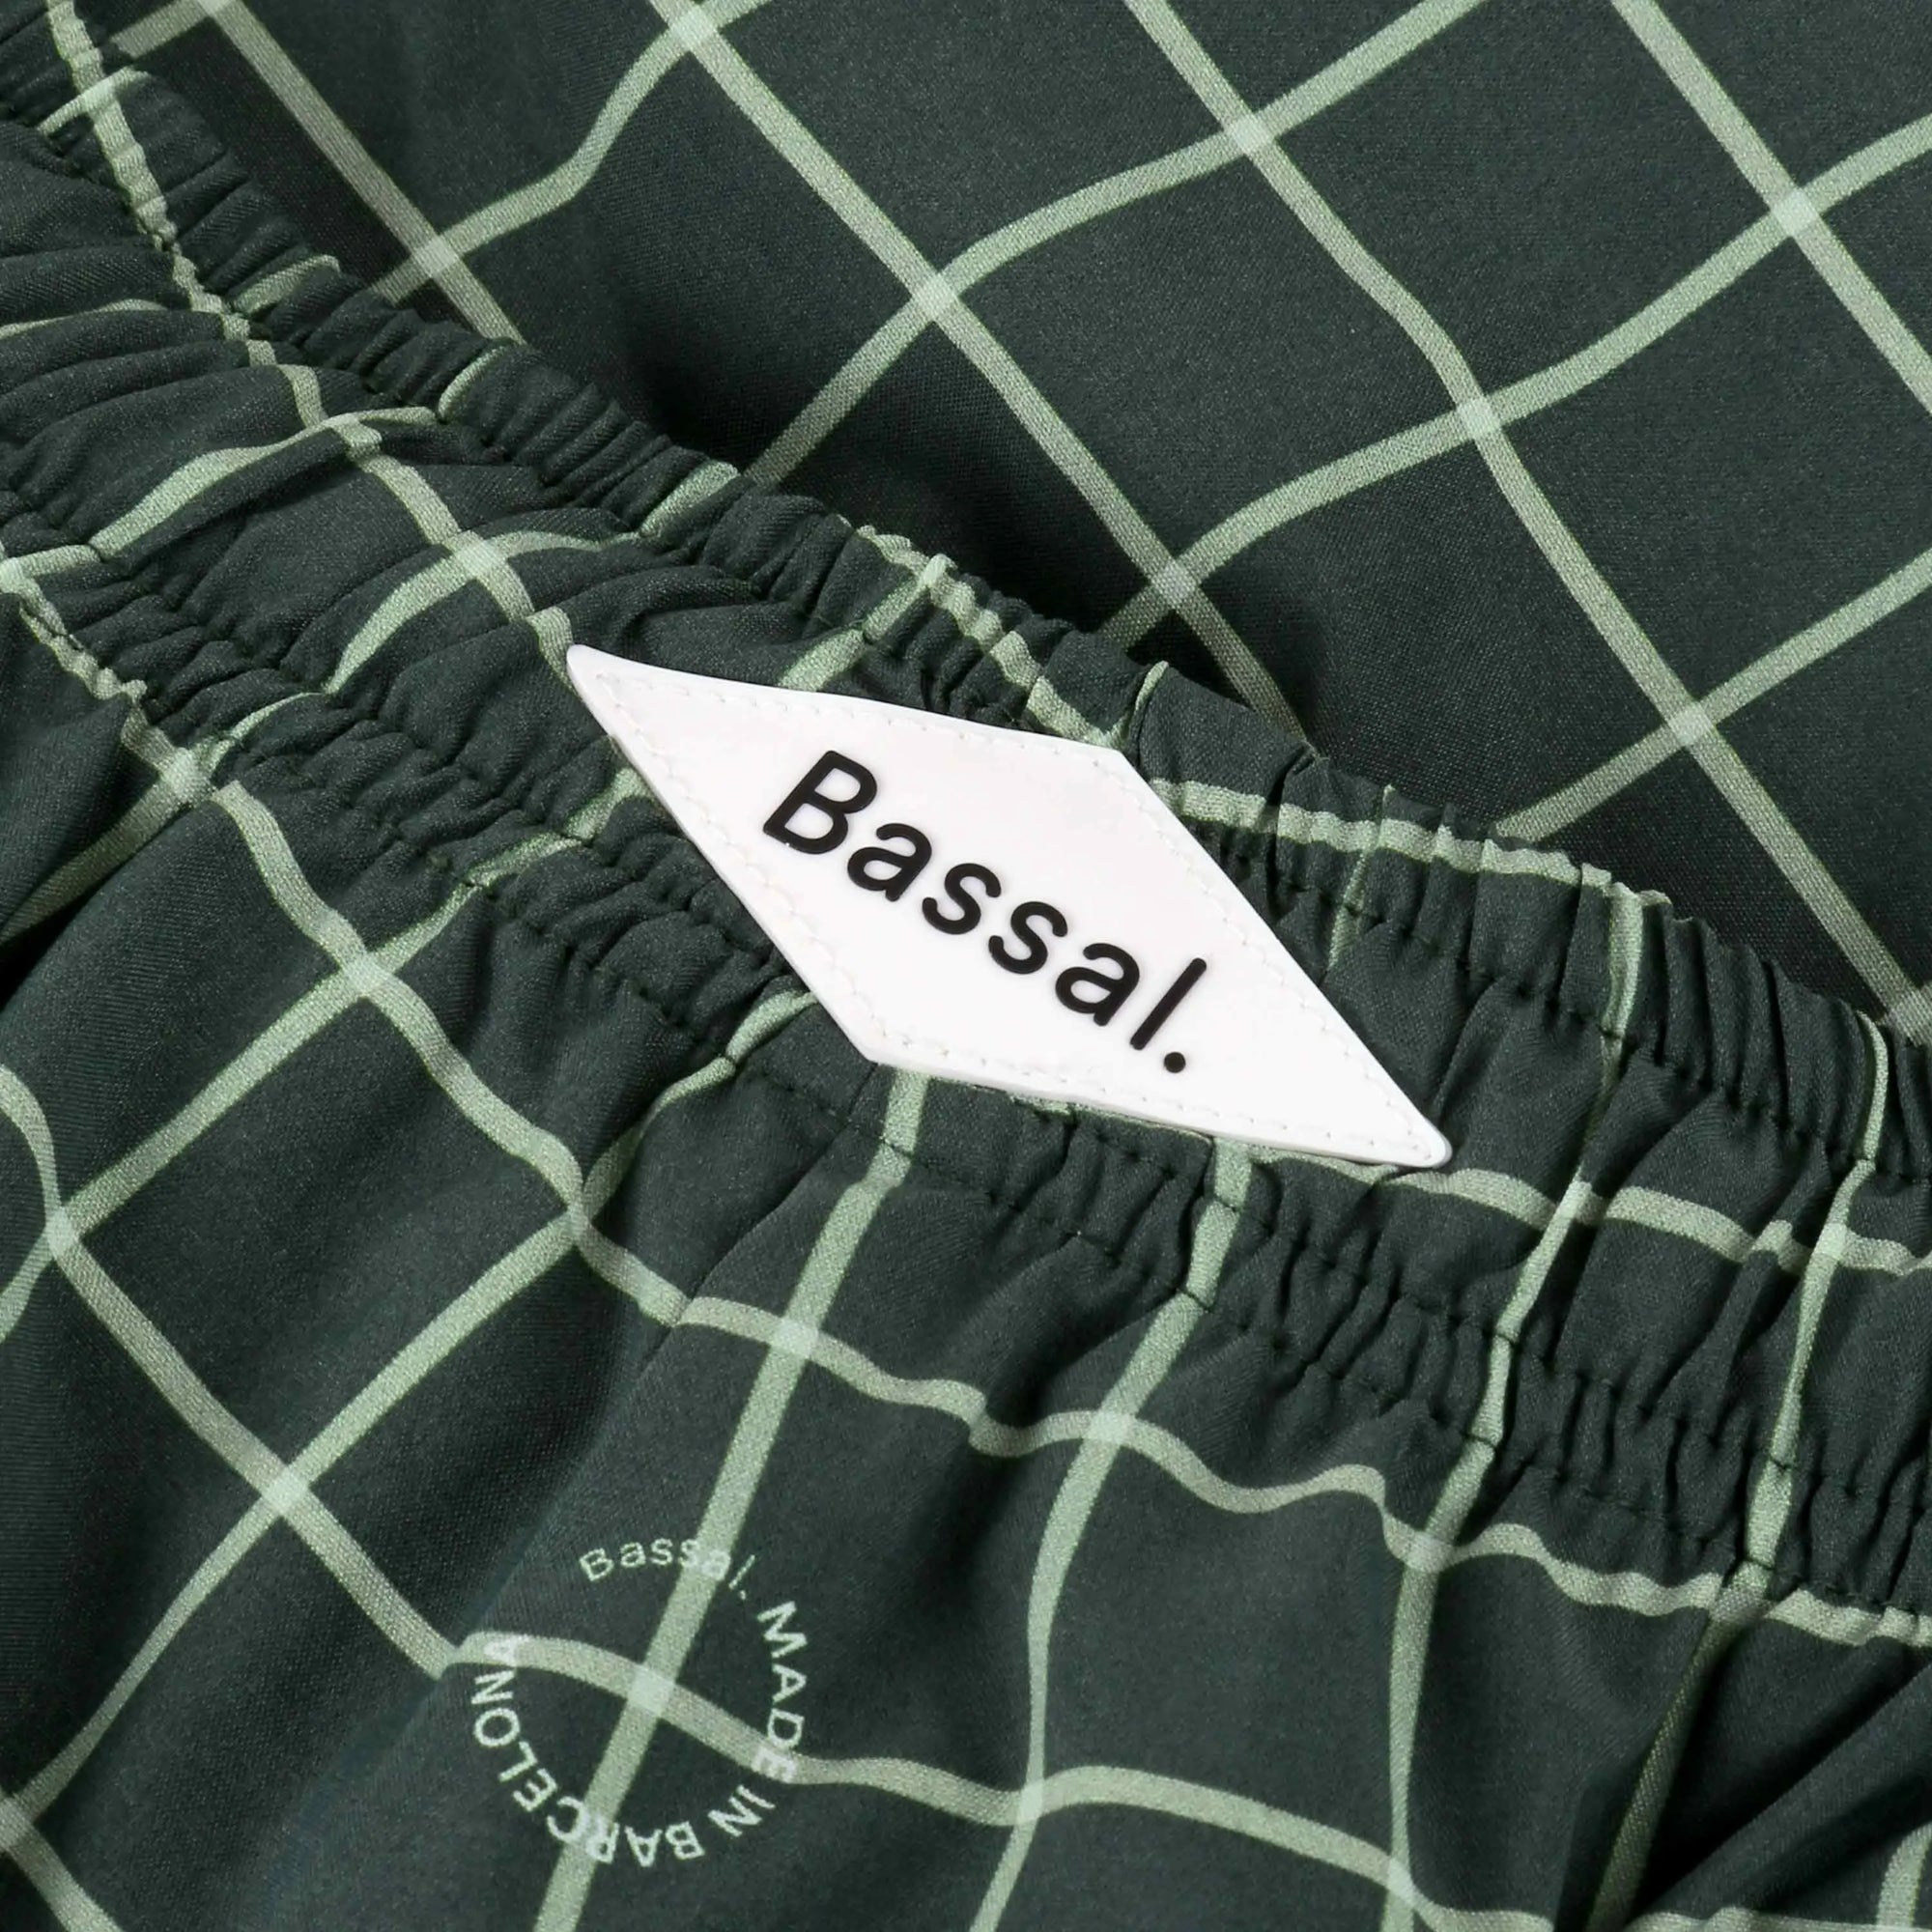 A pair of Verd Swimwear with a white grid pattern neatly folded inside a white box, along with a white product tag bearing the brand name "Bassal." The box lid, placed beside it, also displays the "Bassal" logo and hints at its exclusive availability at bassalstore.